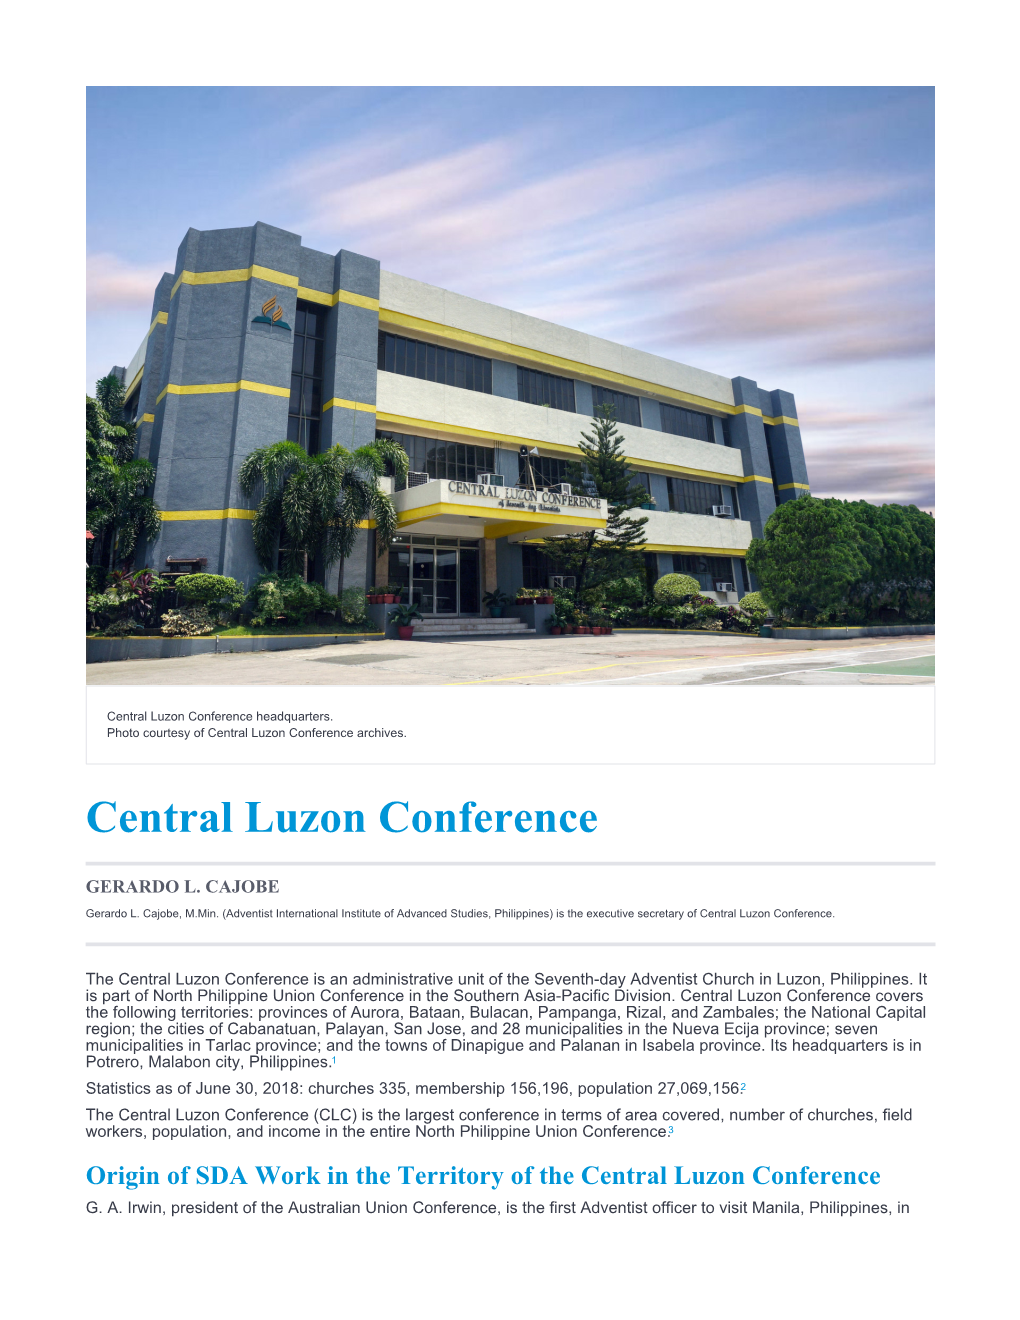 Central Luzon Conference Headquarters